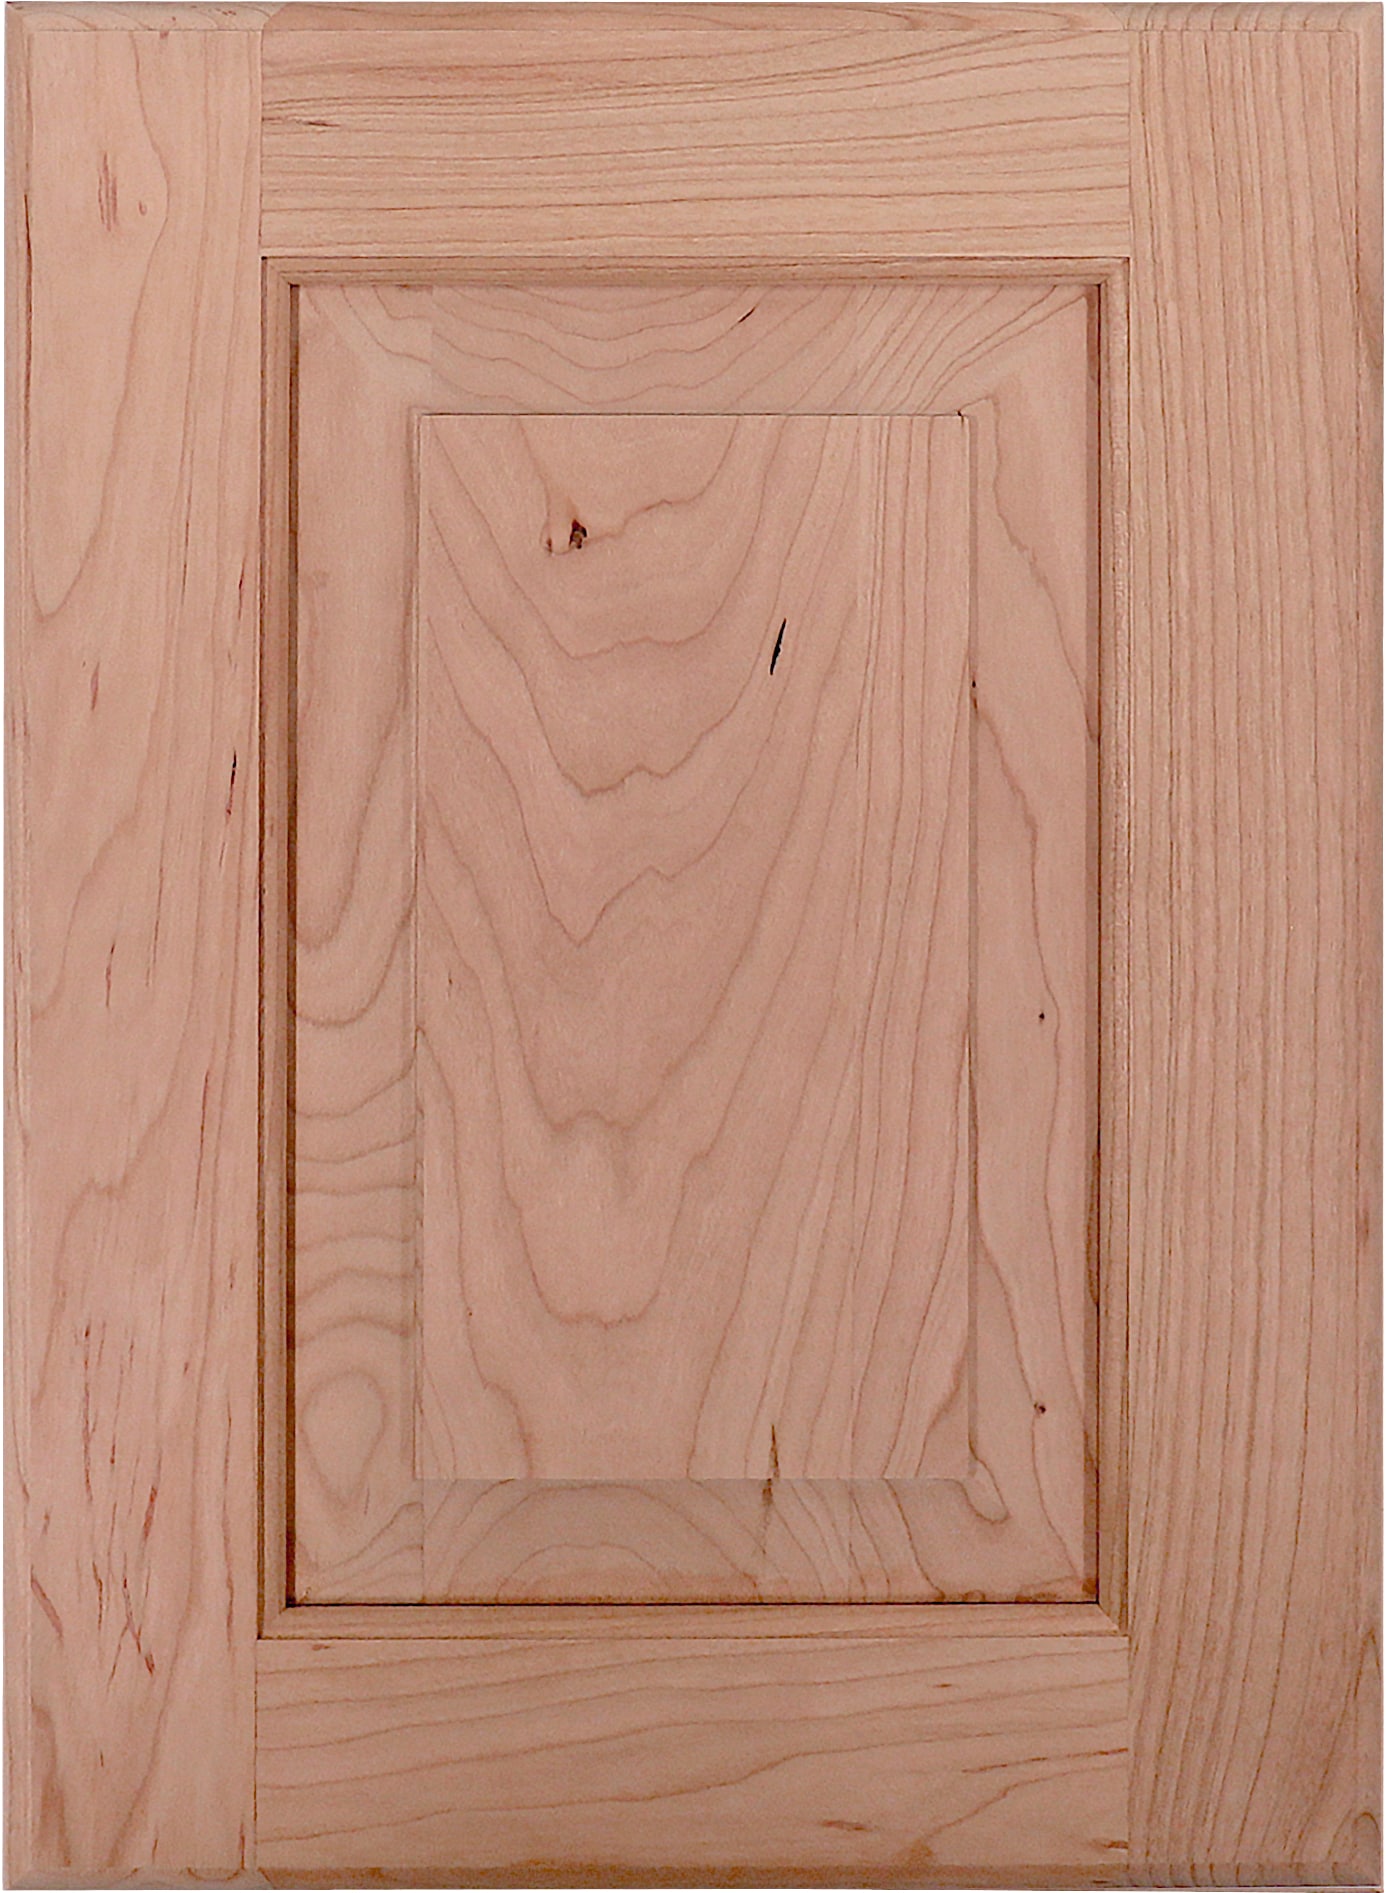 Narrow, Shaker Style, Surface Mounted Medicine Cabinet, Cherry, Oak, or  Maple, Finished